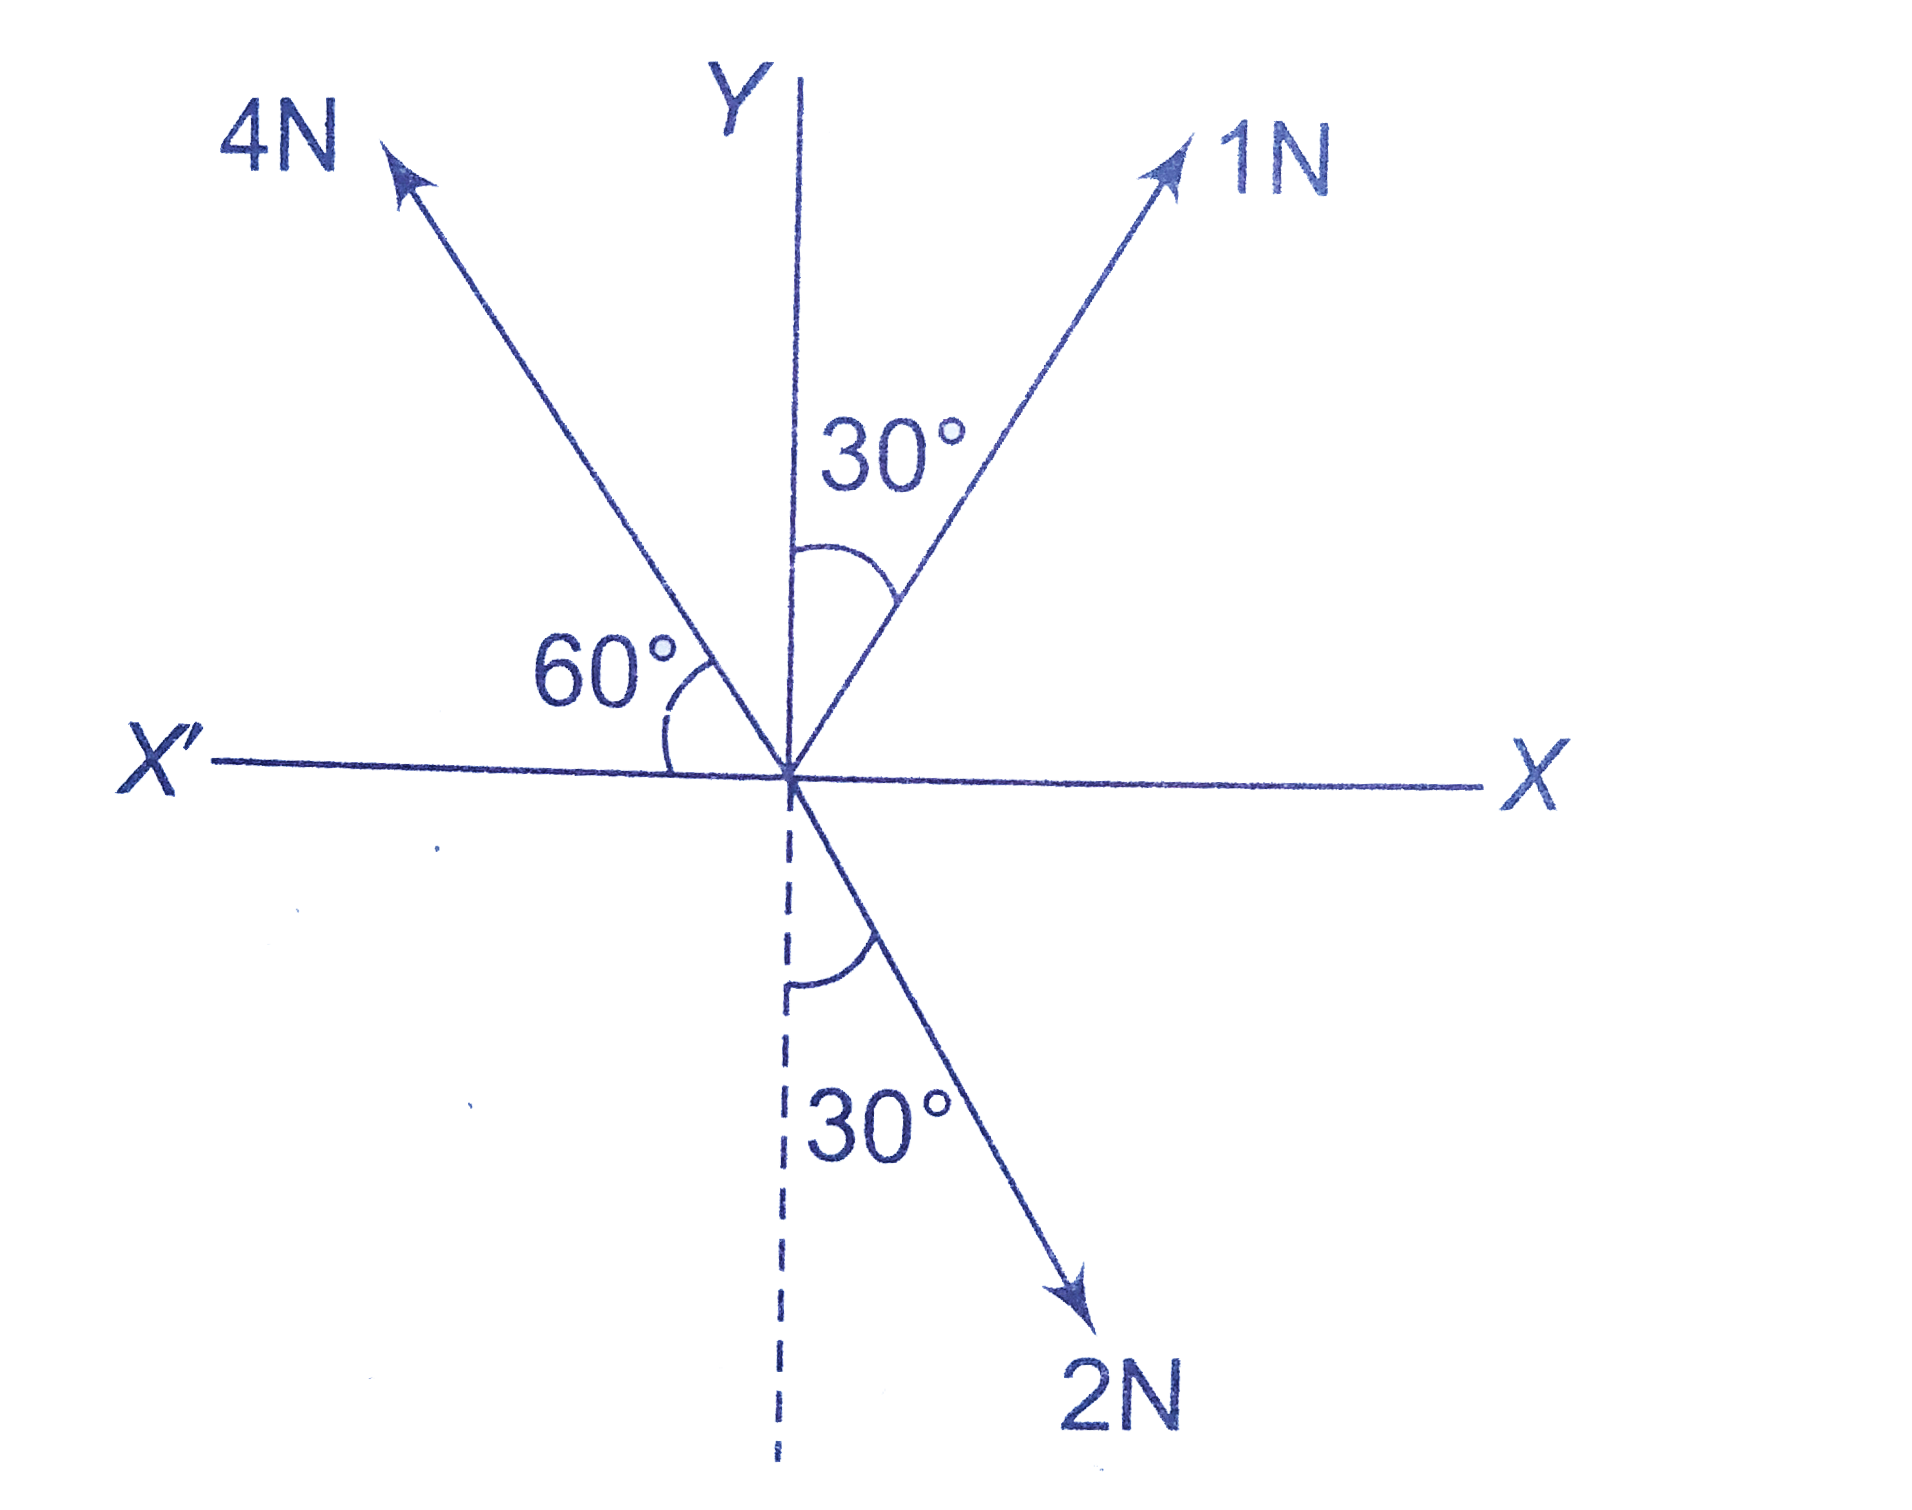 Three forces are acting on a particle as shown in the figure. To have the resultant force only along the Y-direction, the magnitude of the minimum additional force needed is